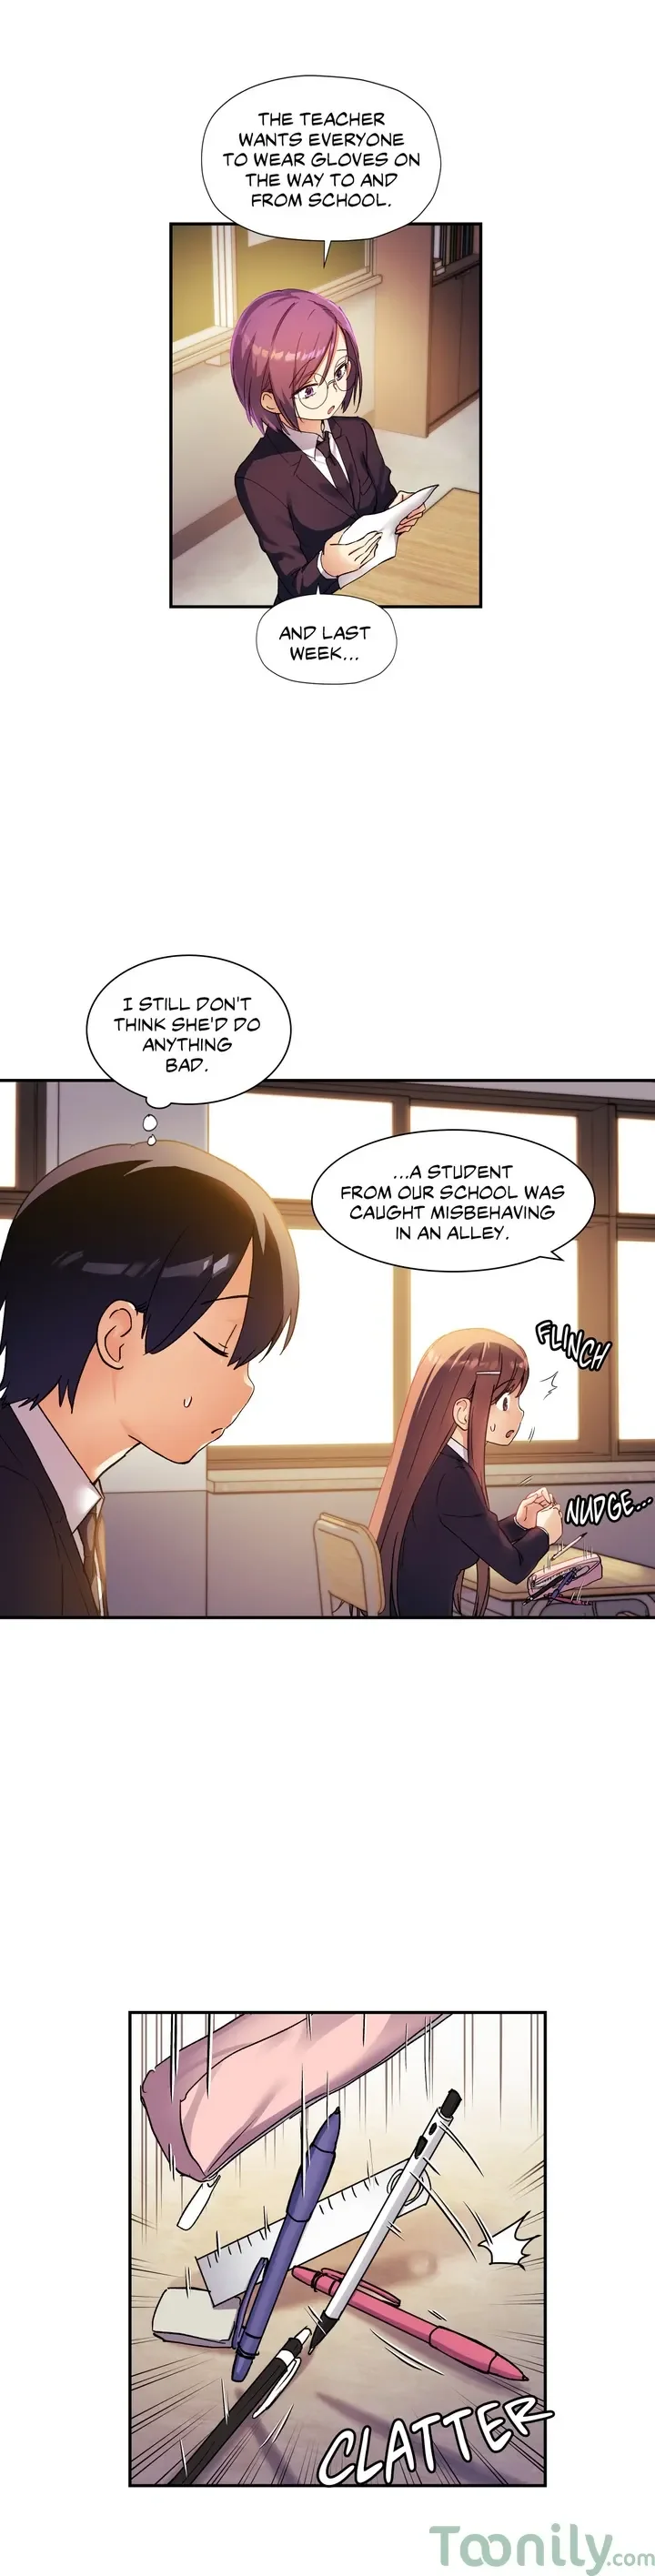 under-observation-my-first-loves-and-i-chap-30-5